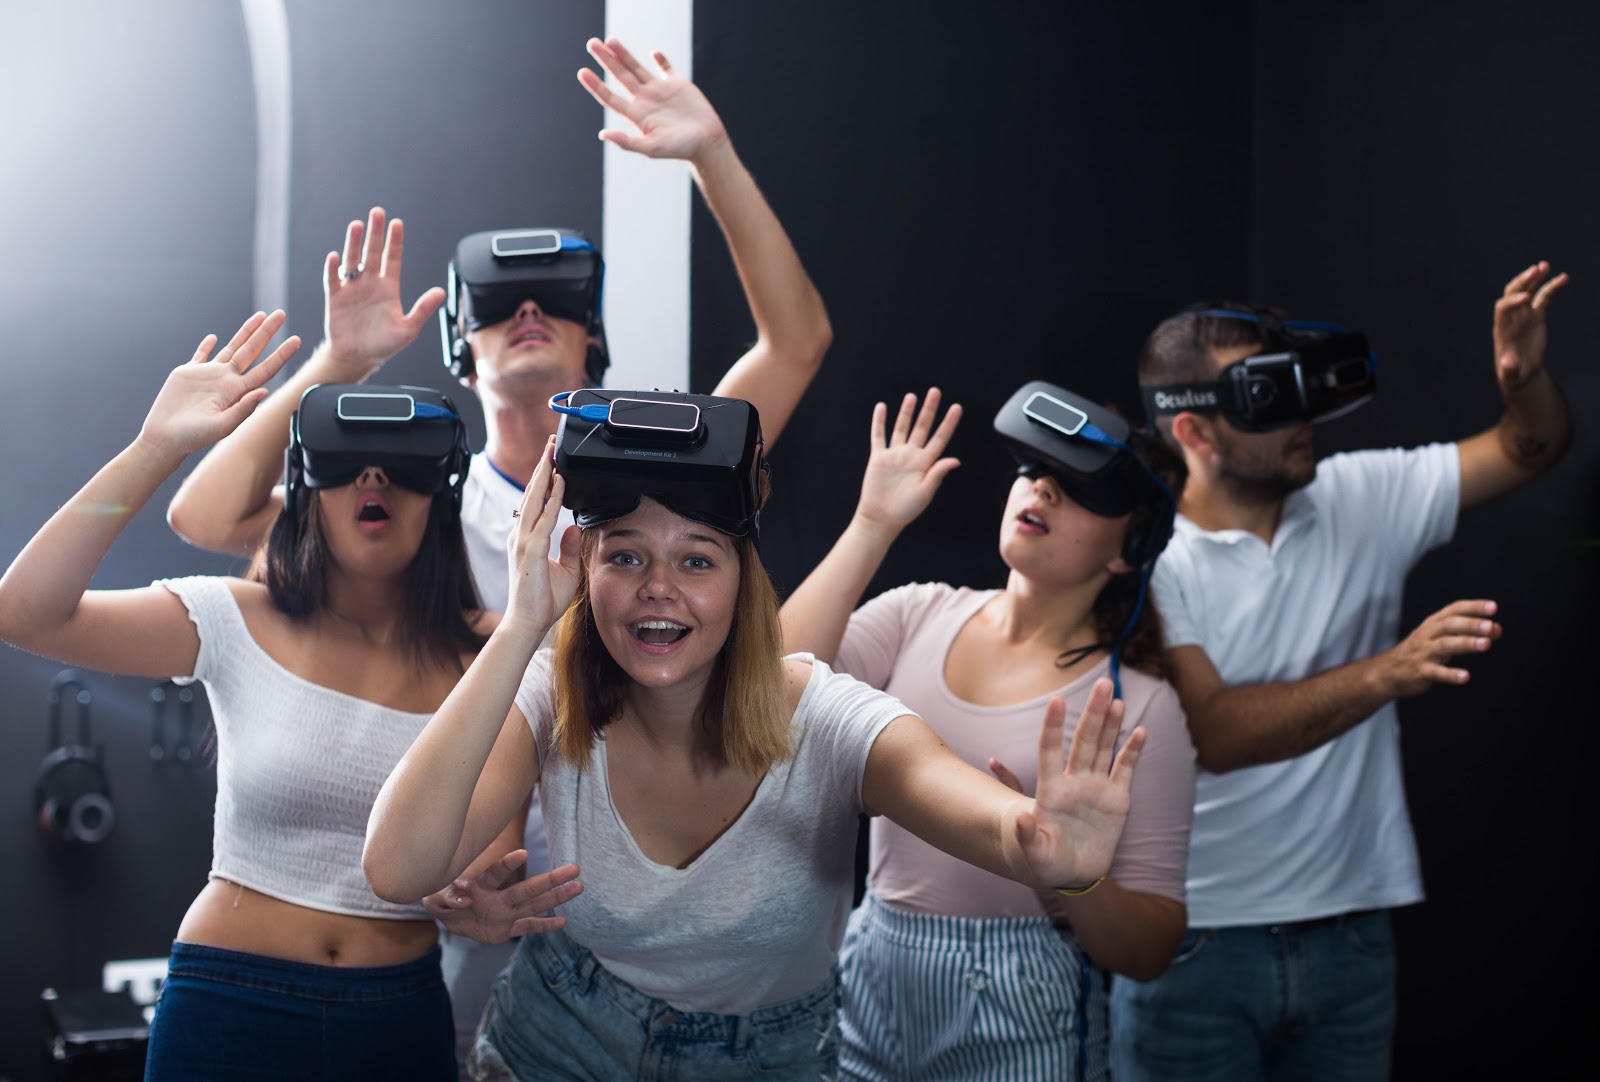 How To Choose A Vr Product For Escape Room Center